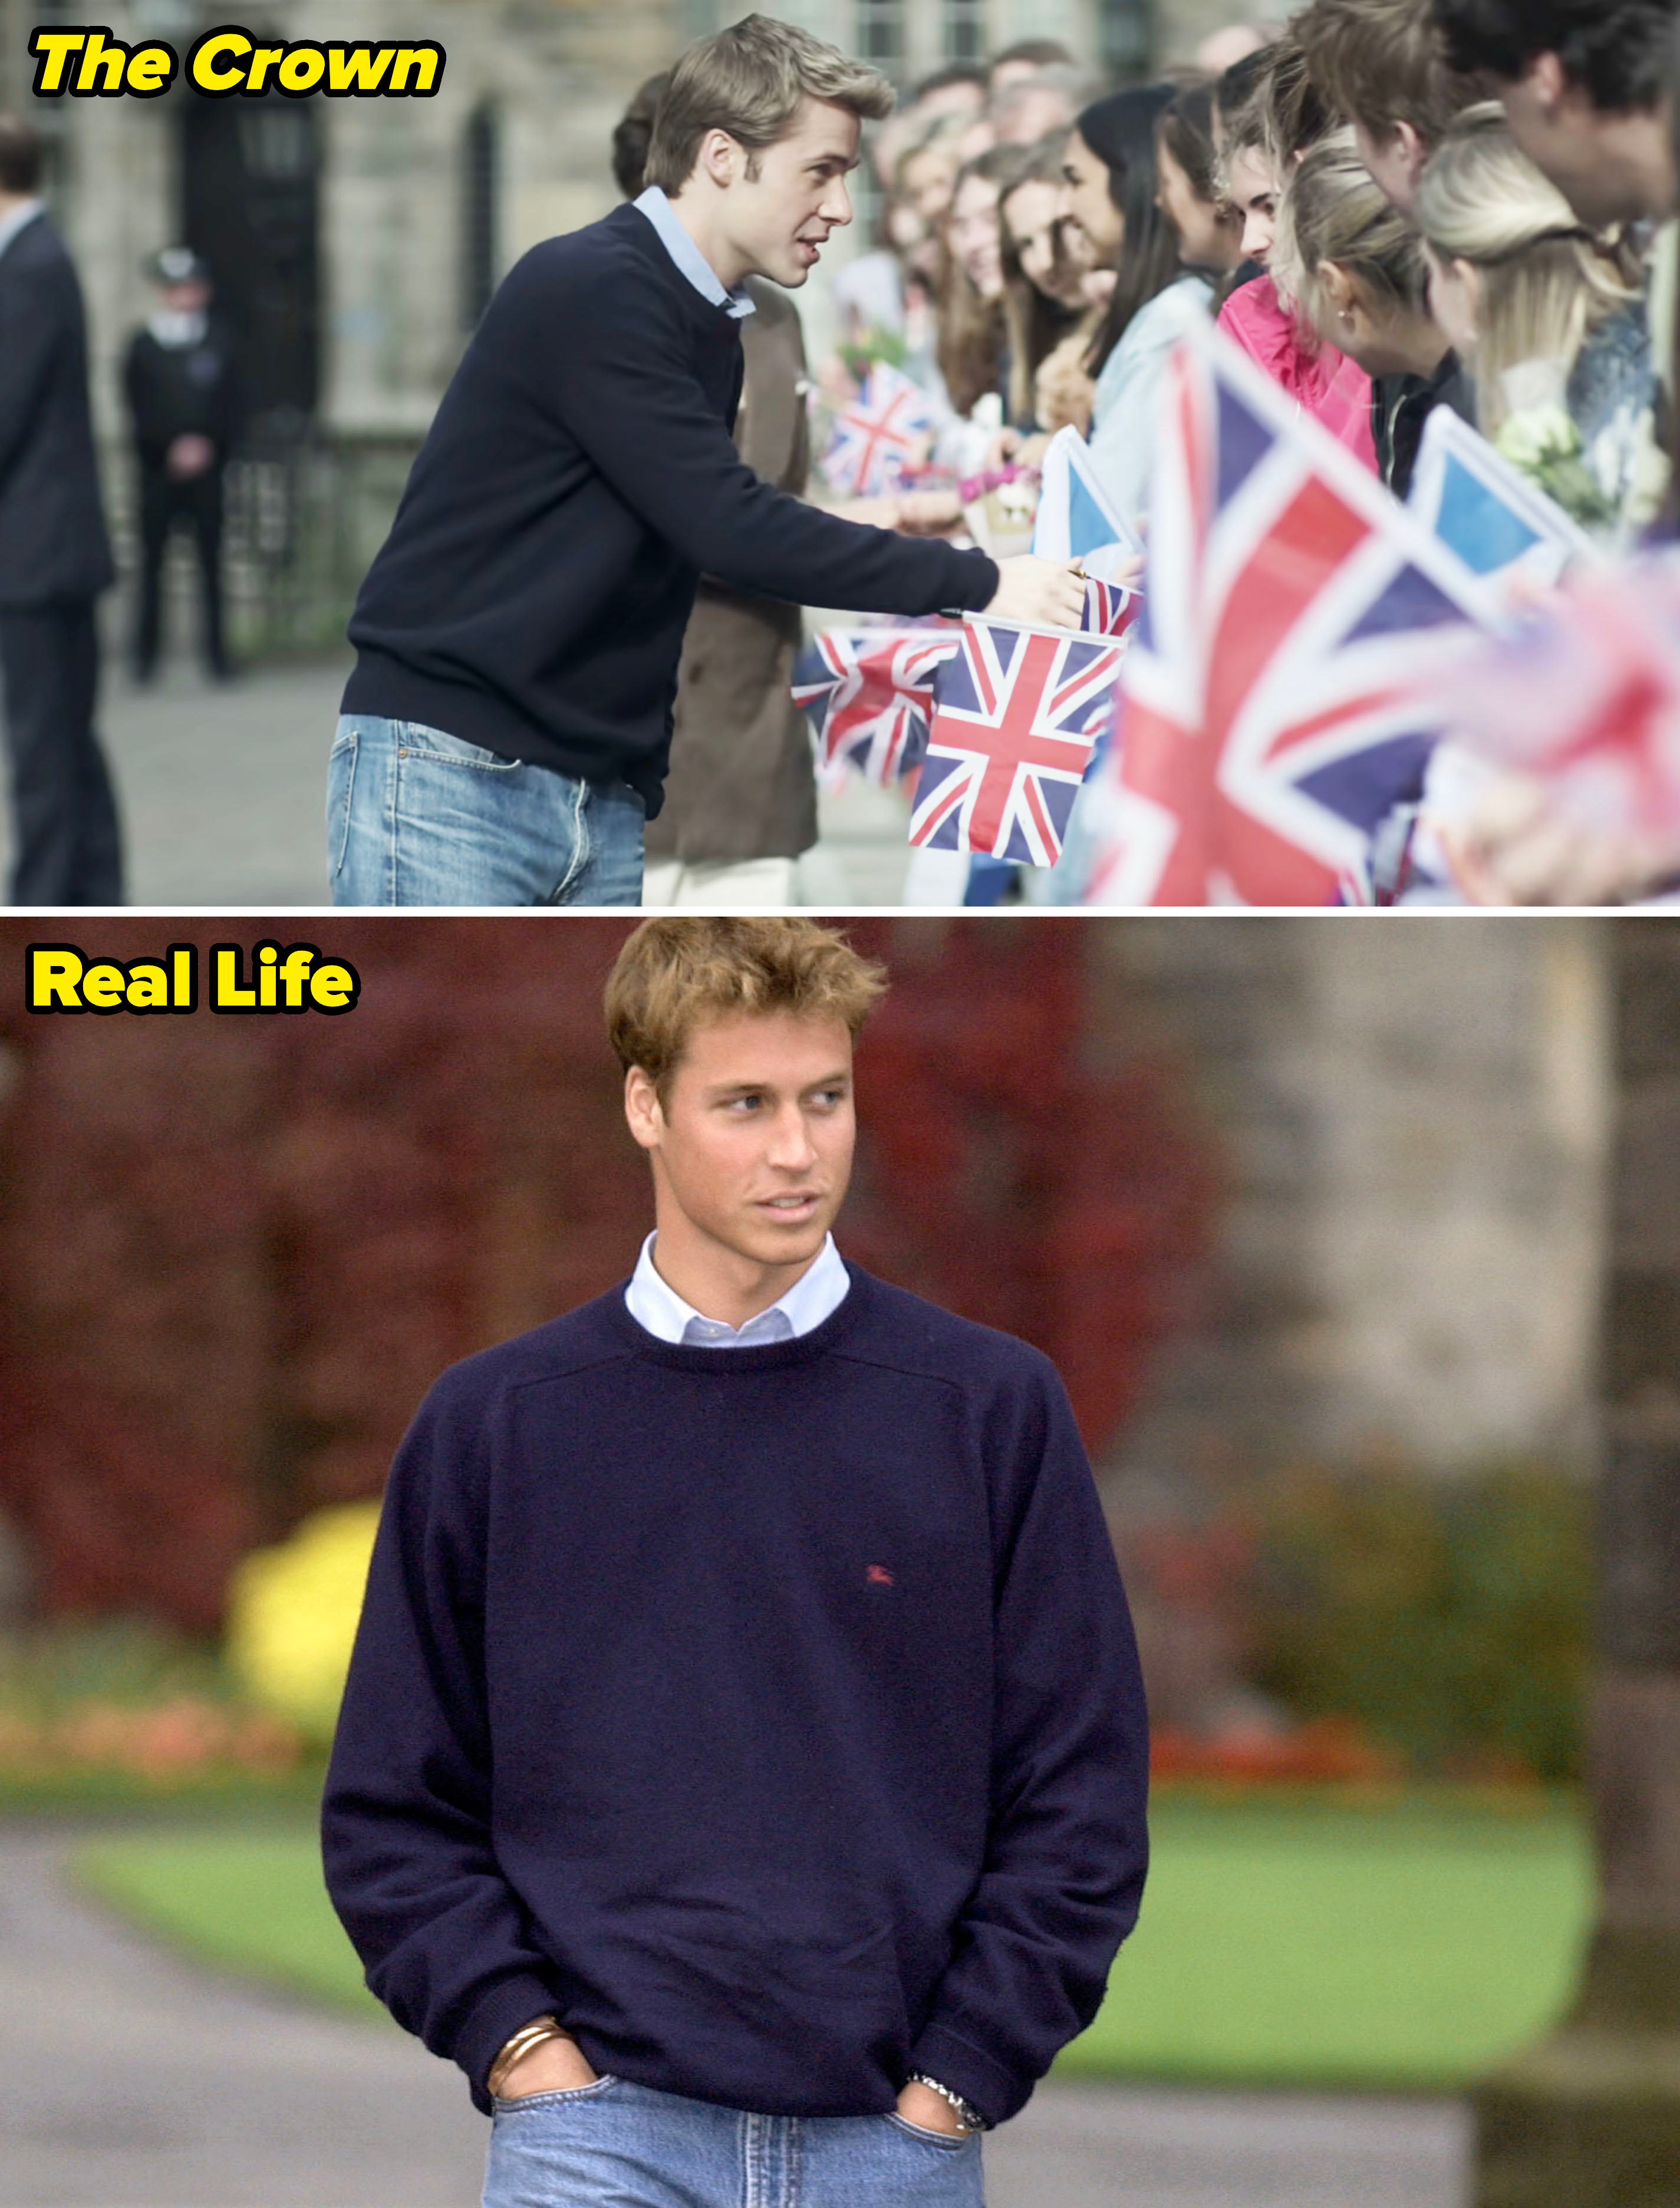 Side-by-sides of Prince William in &quot;The Crown&quot; vs. real life